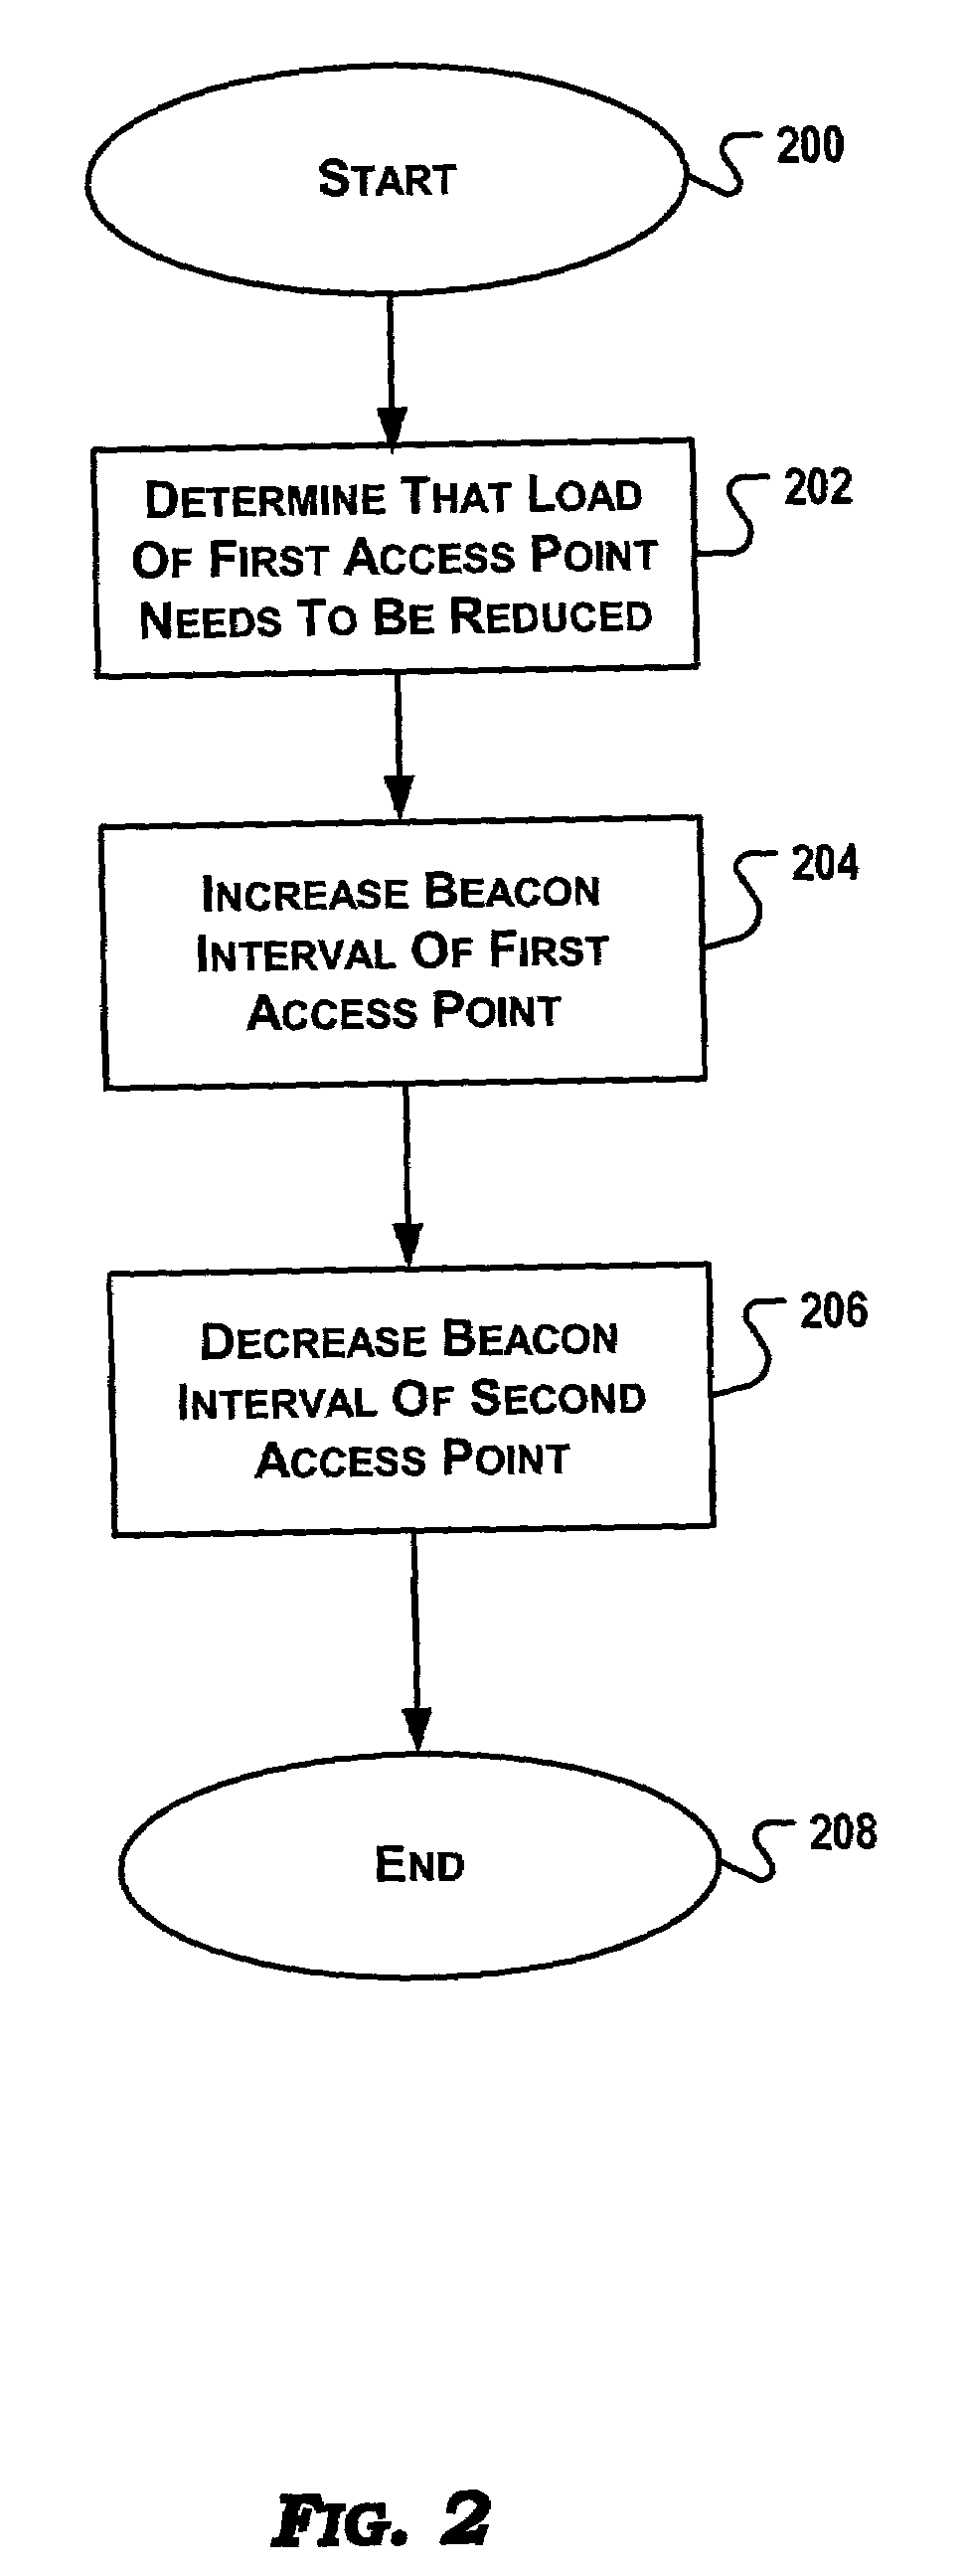 Dynamically configurable beacon intervals for wireless LAN access points